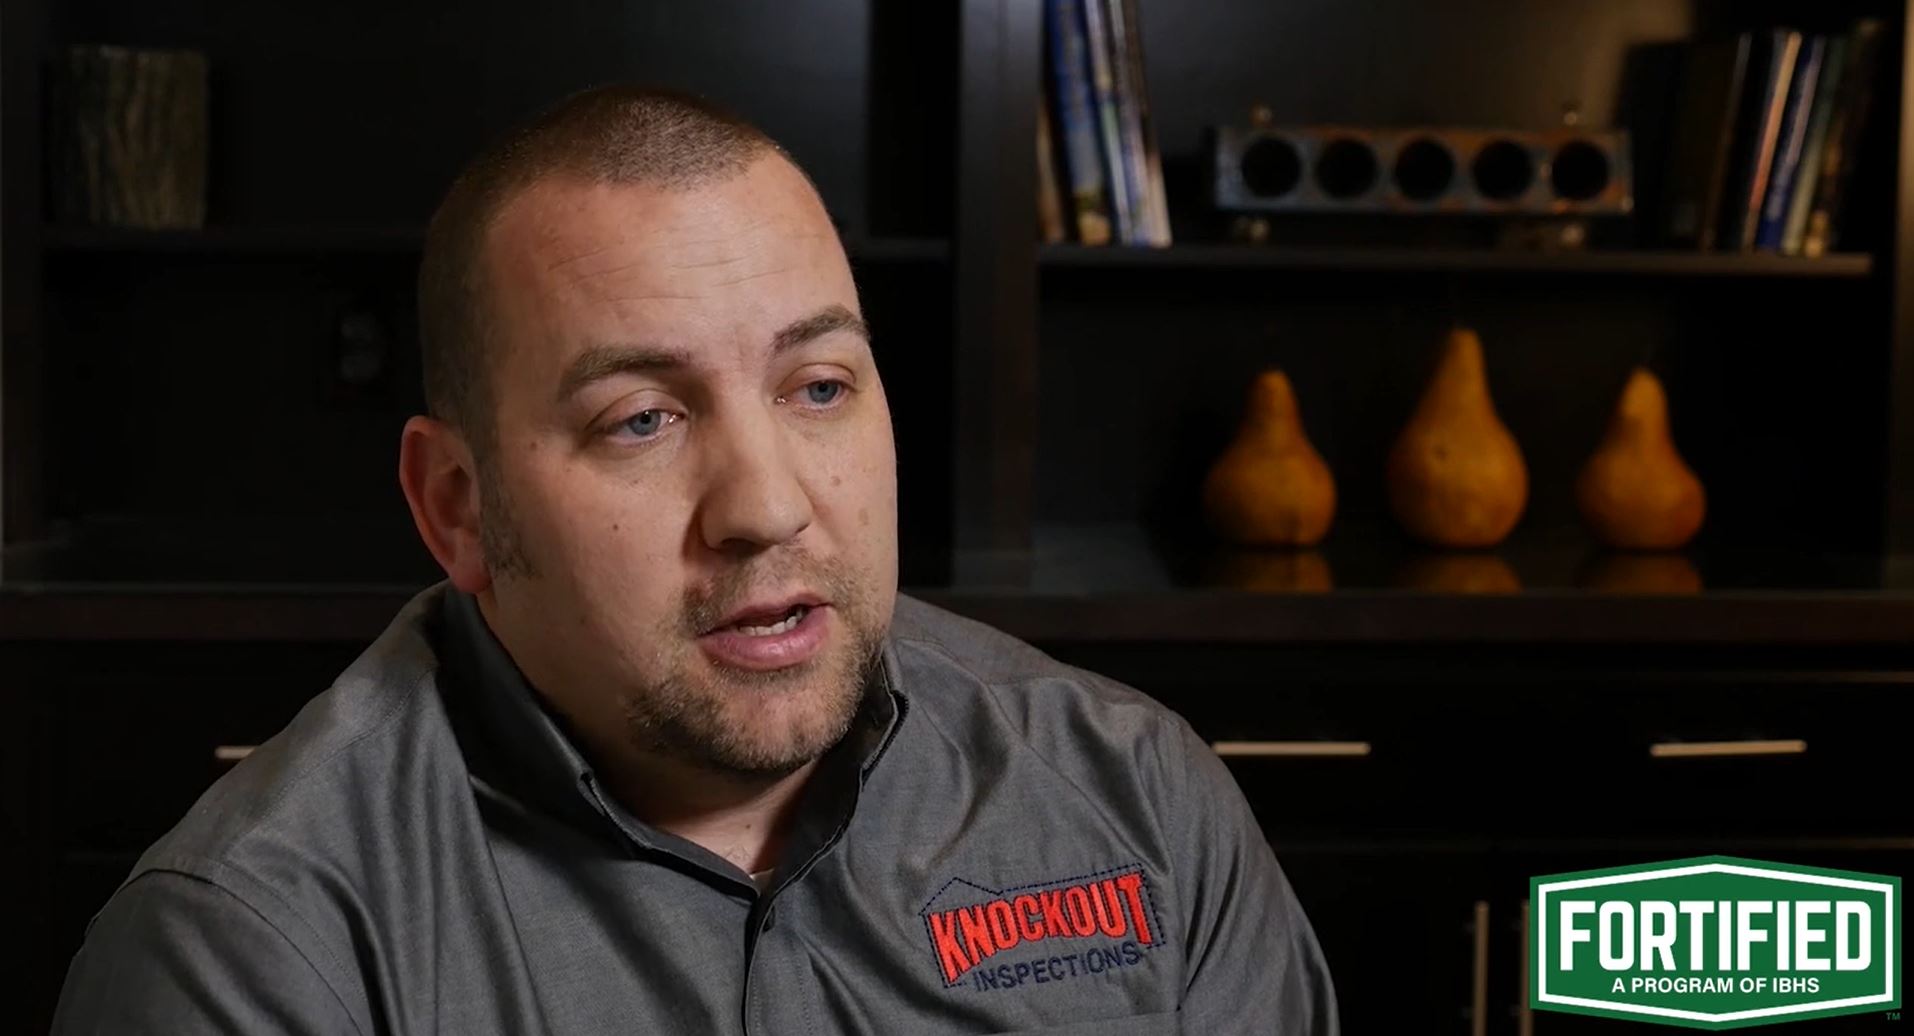 Nathan Lippincott, Knockout Inspections, FORTIFIED Evaluator